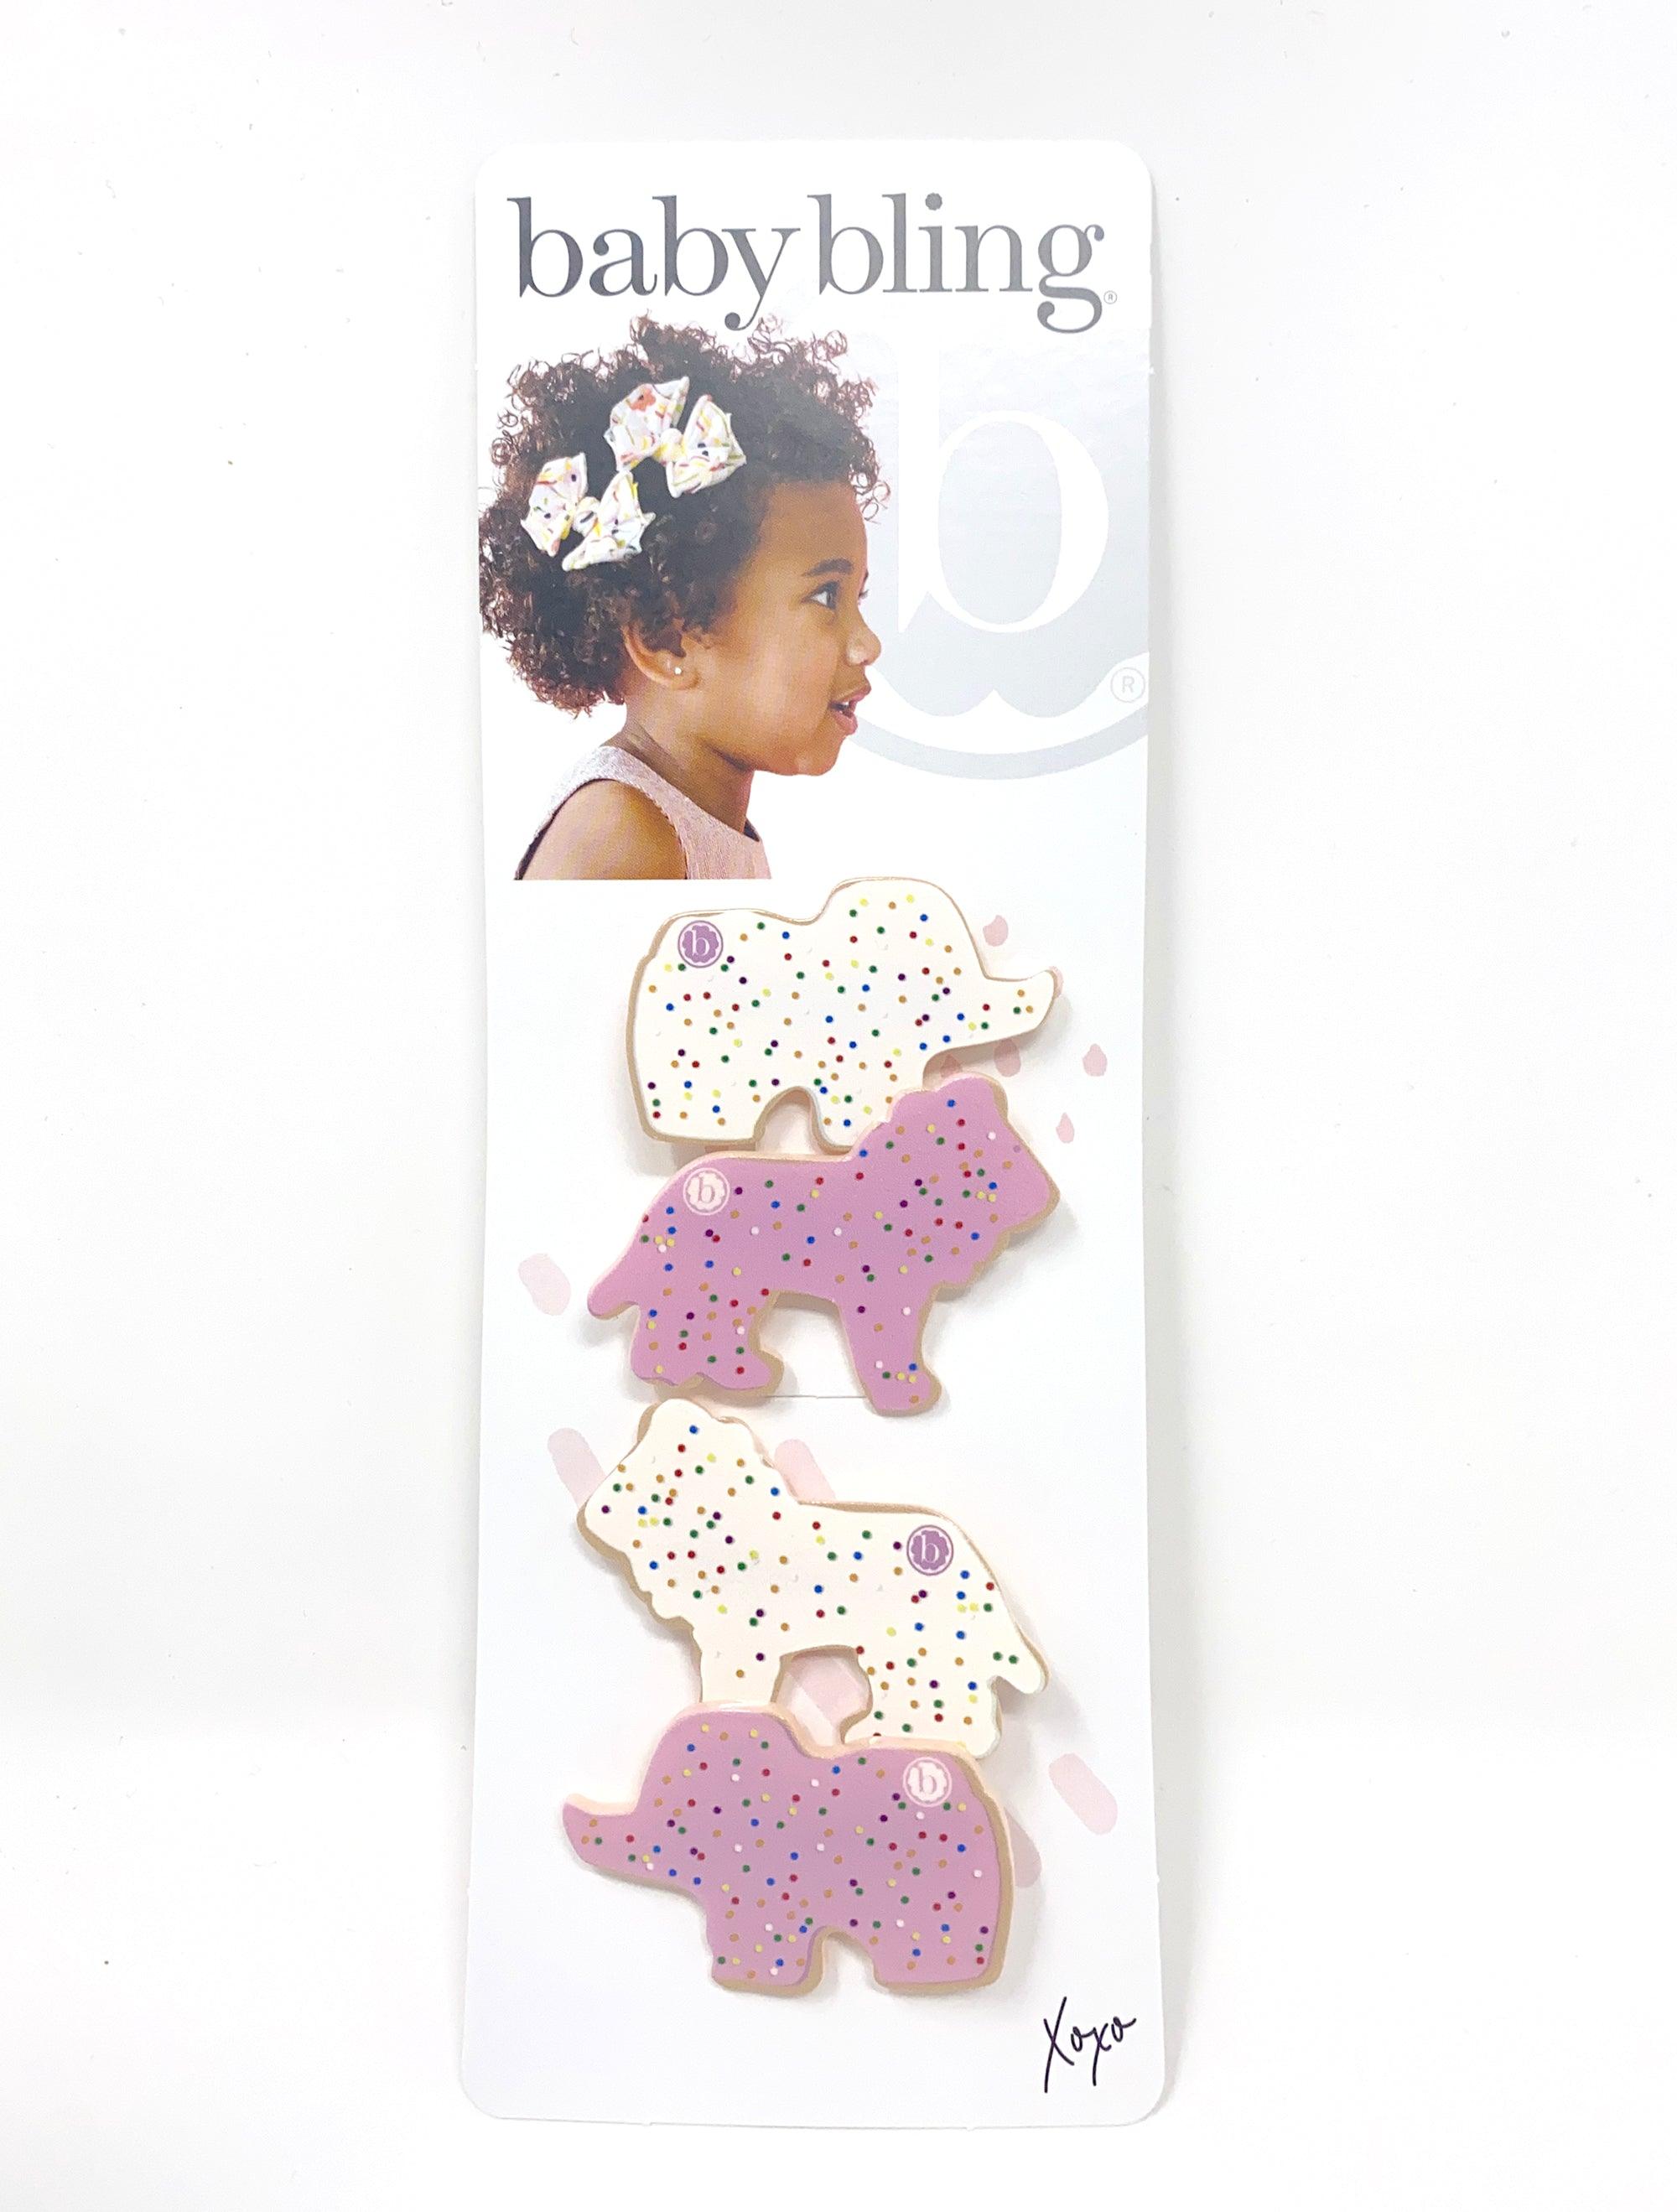 4PK NOVELTY RESIN CLIPS: animal cookies